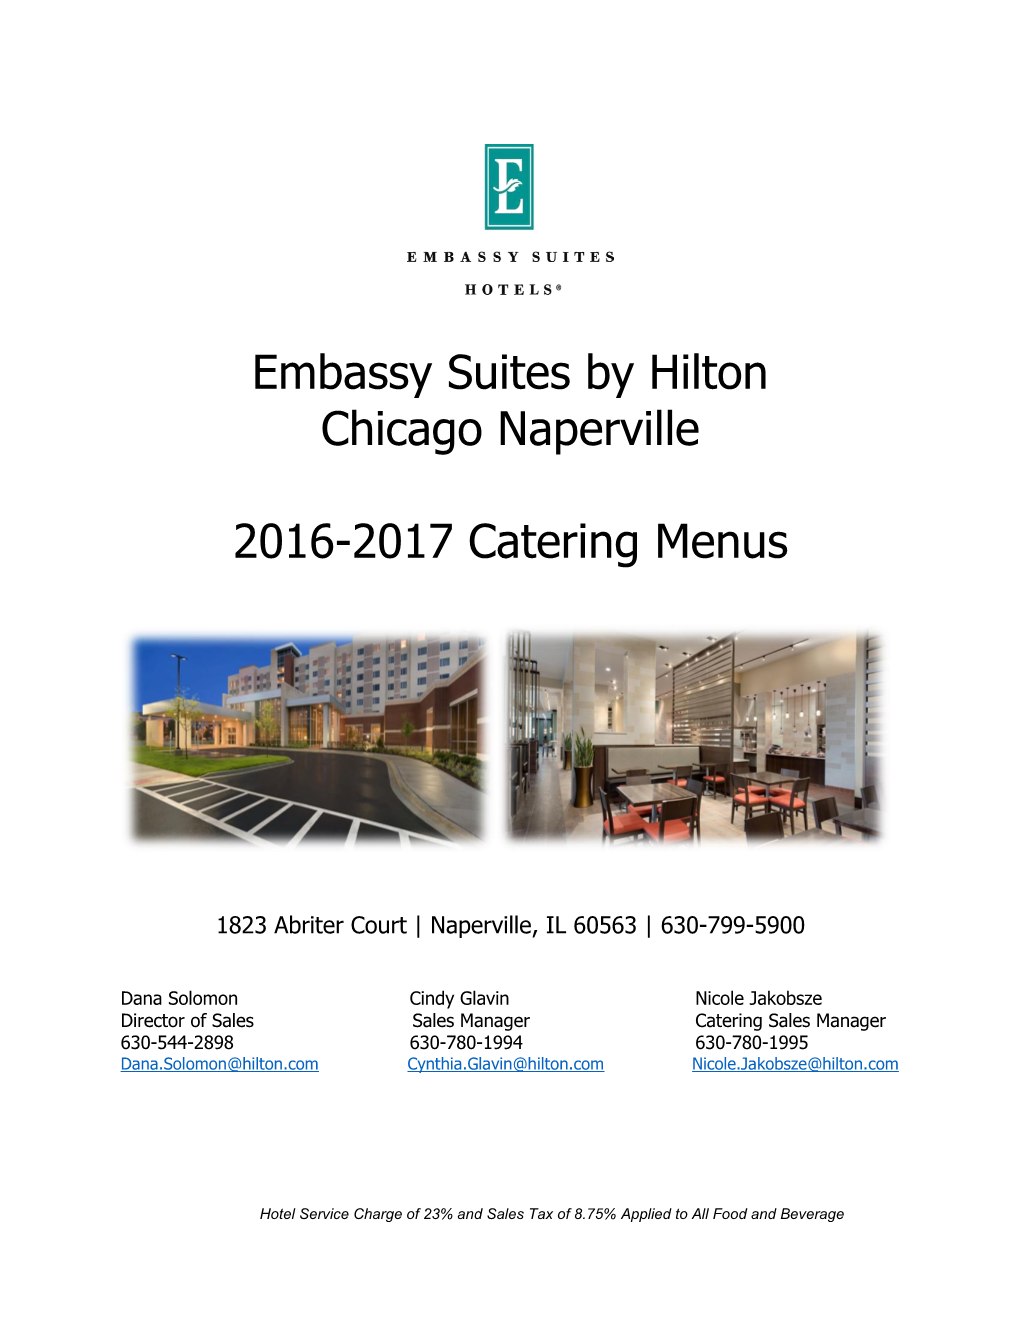 Embassy Suites by Hilton Chicago Naperville 2016-2017 Catering